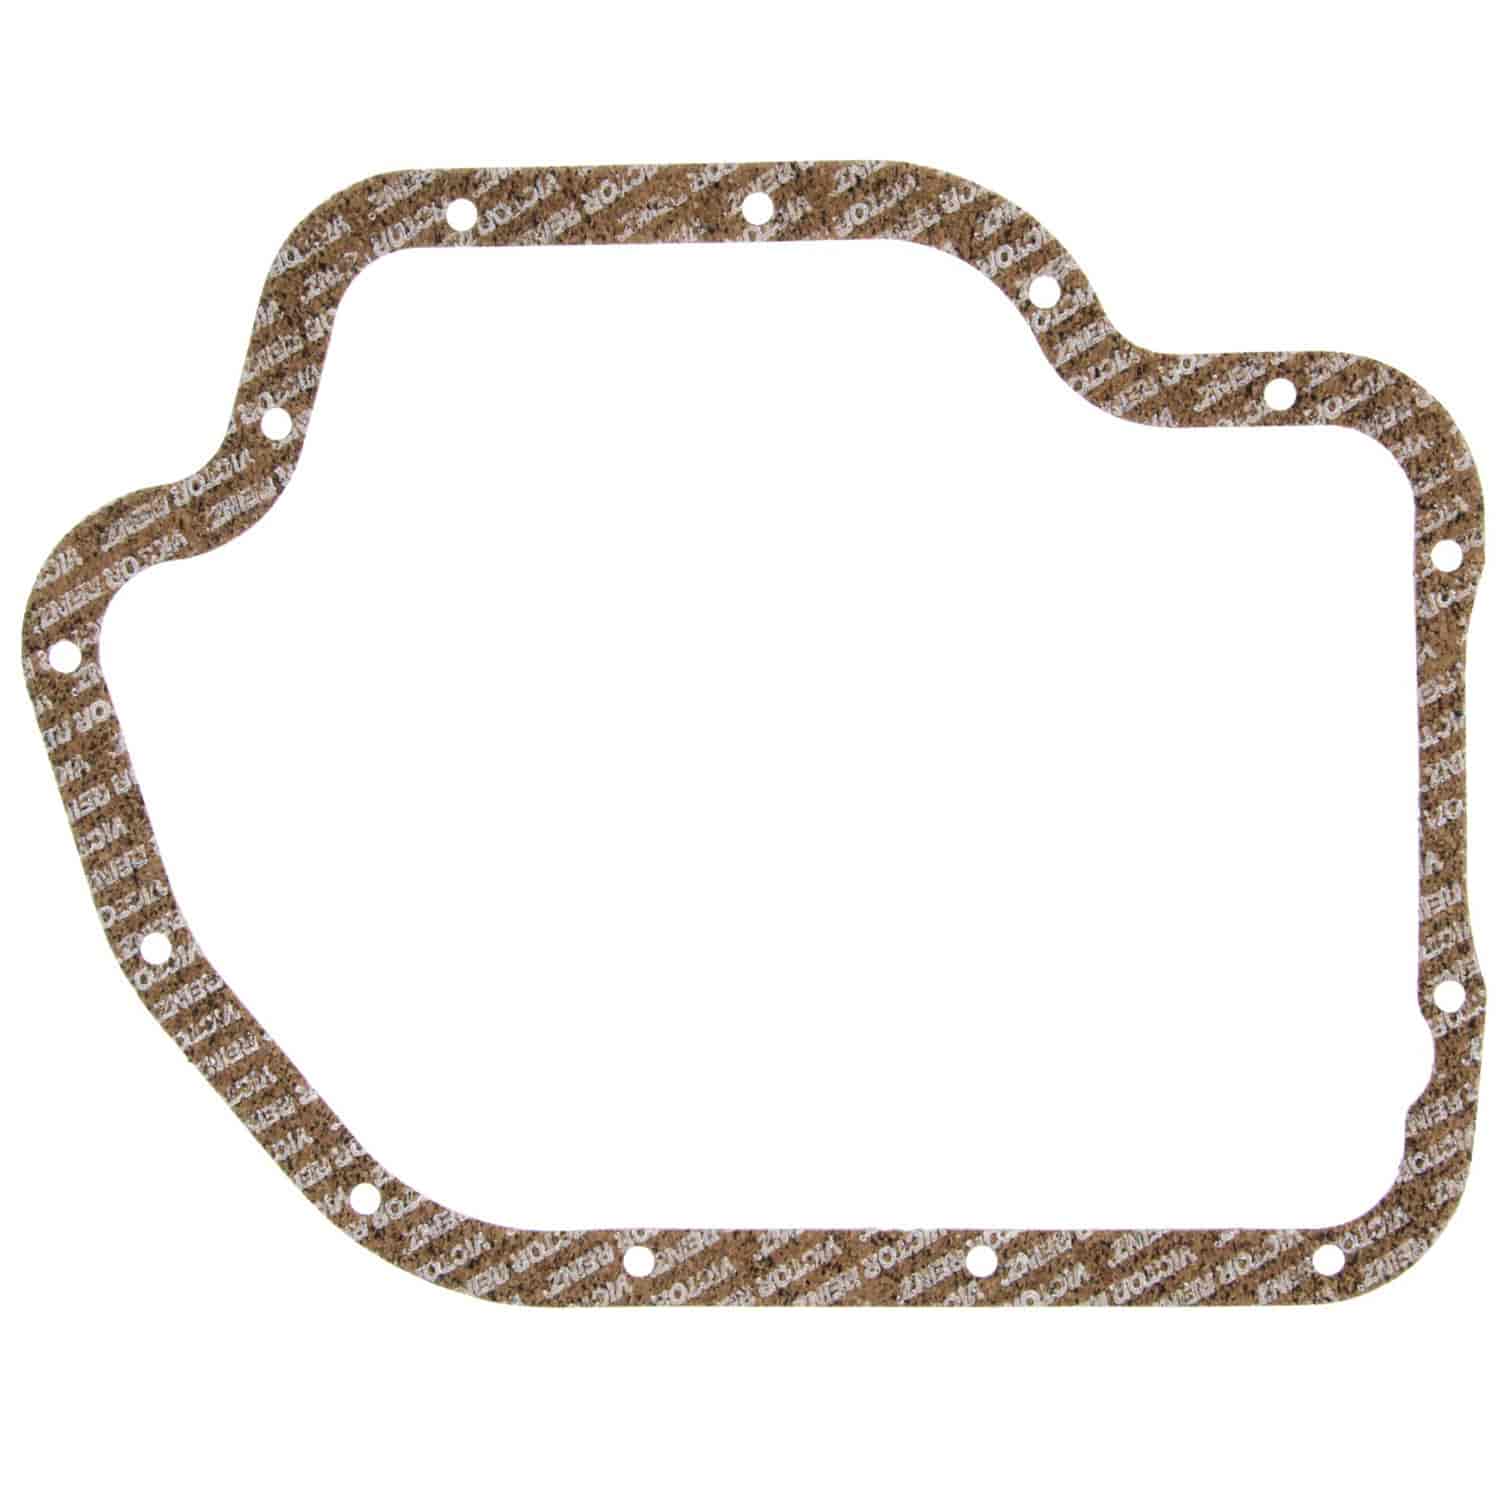 Automatic Transmission Gasket Bui  Cad  Chev-Pass&Trk  GMC  Jeep  Olds  Pont M40 375 400 475 2400 63-89